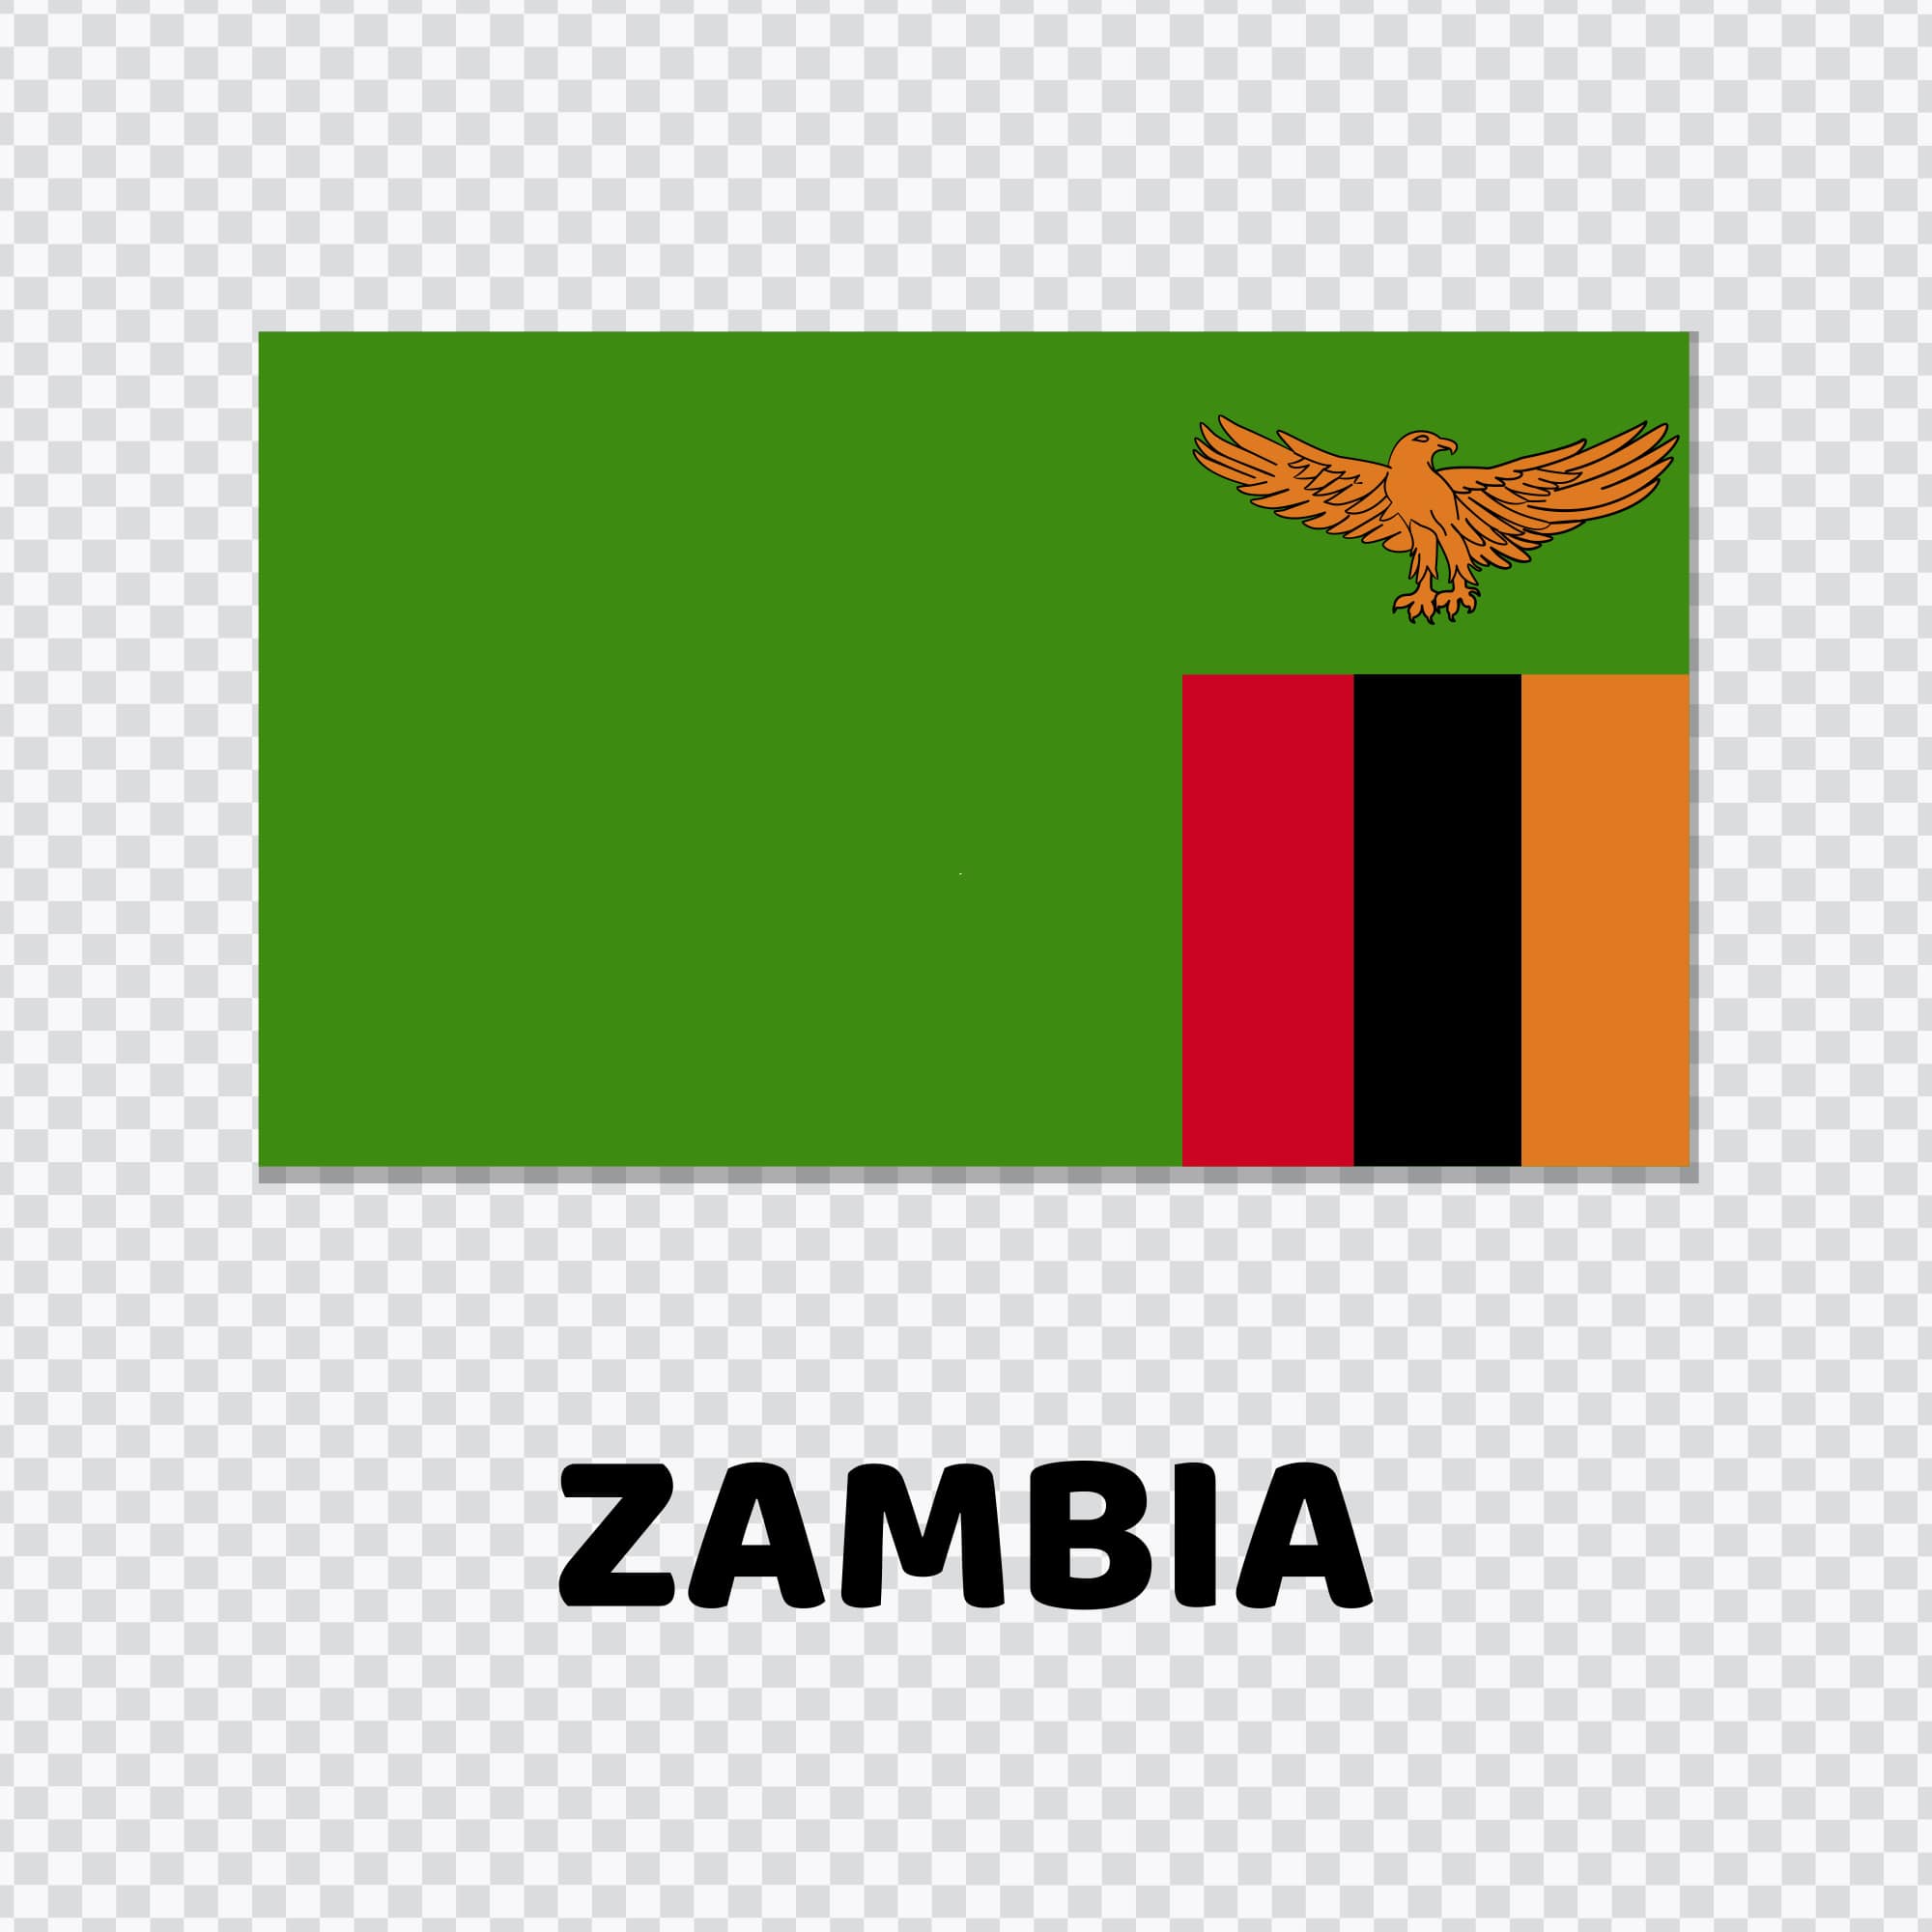 Zambia Country flag vector graphics for free download in ai, eps10 and svg format